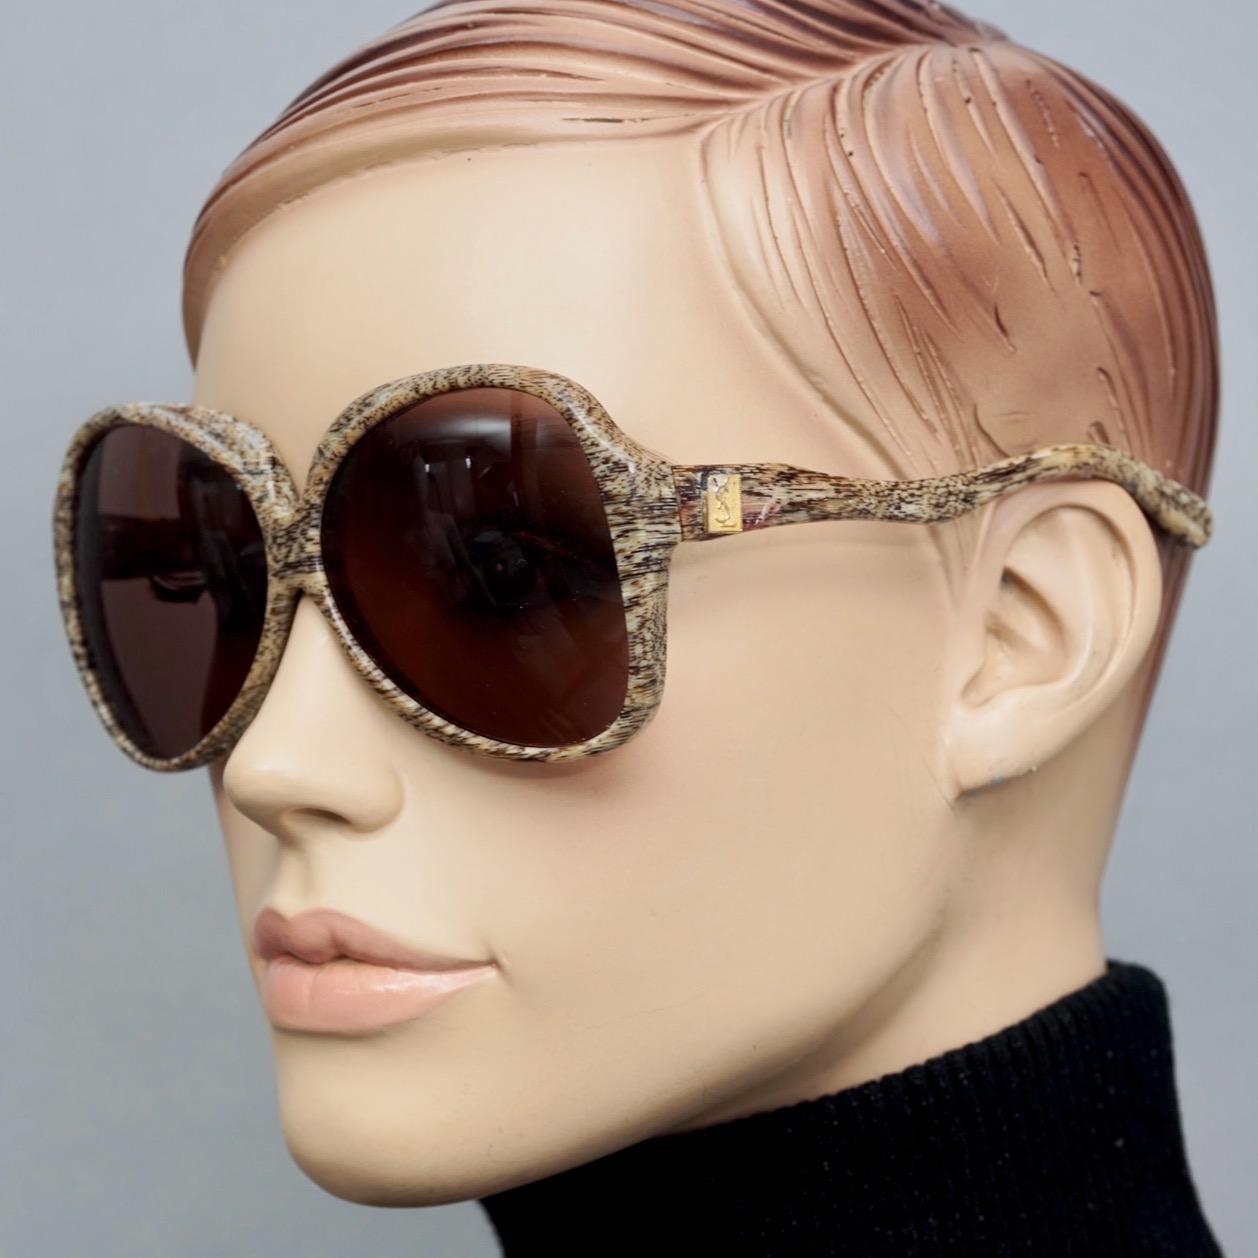 Vintage YVES SAINT LAURENT Ysl Wood Illusion Oversized Sunglasses

Measurements:
Height: 2.36 inches (6 cm)
Horizontal Width: 5.51 inches (14 cm)
Arms: 5.11 inches (13 cm)

Features:
- 100% Authentic YVES SAINT LAURENT. 
- Wood illusion pattern